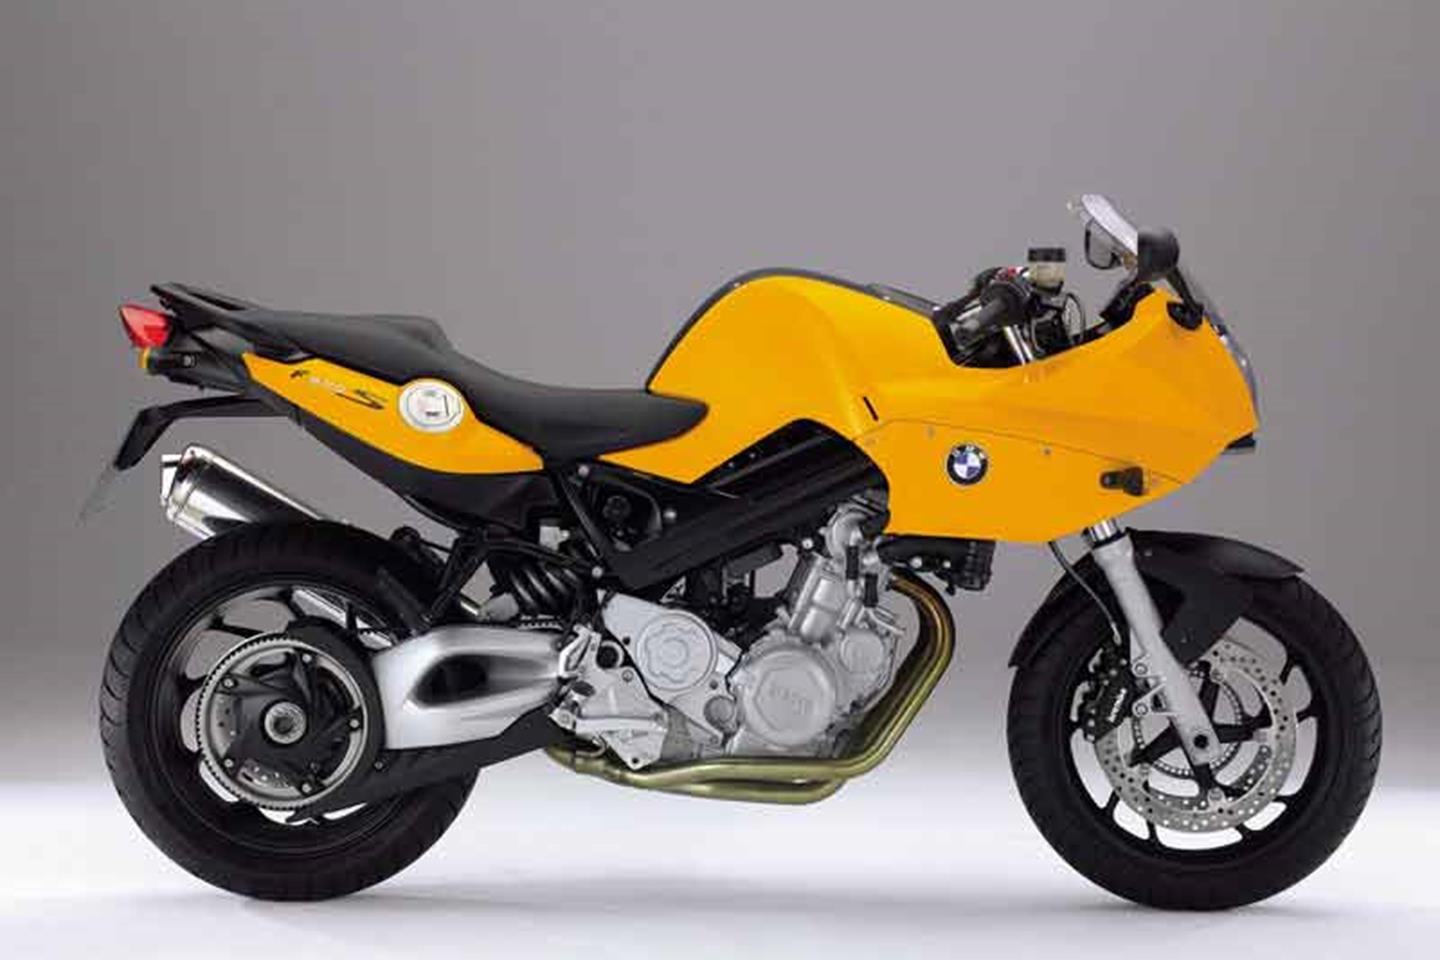 BMW F800S (2006-2010) Review | Speed, Specs & Prices | MCN